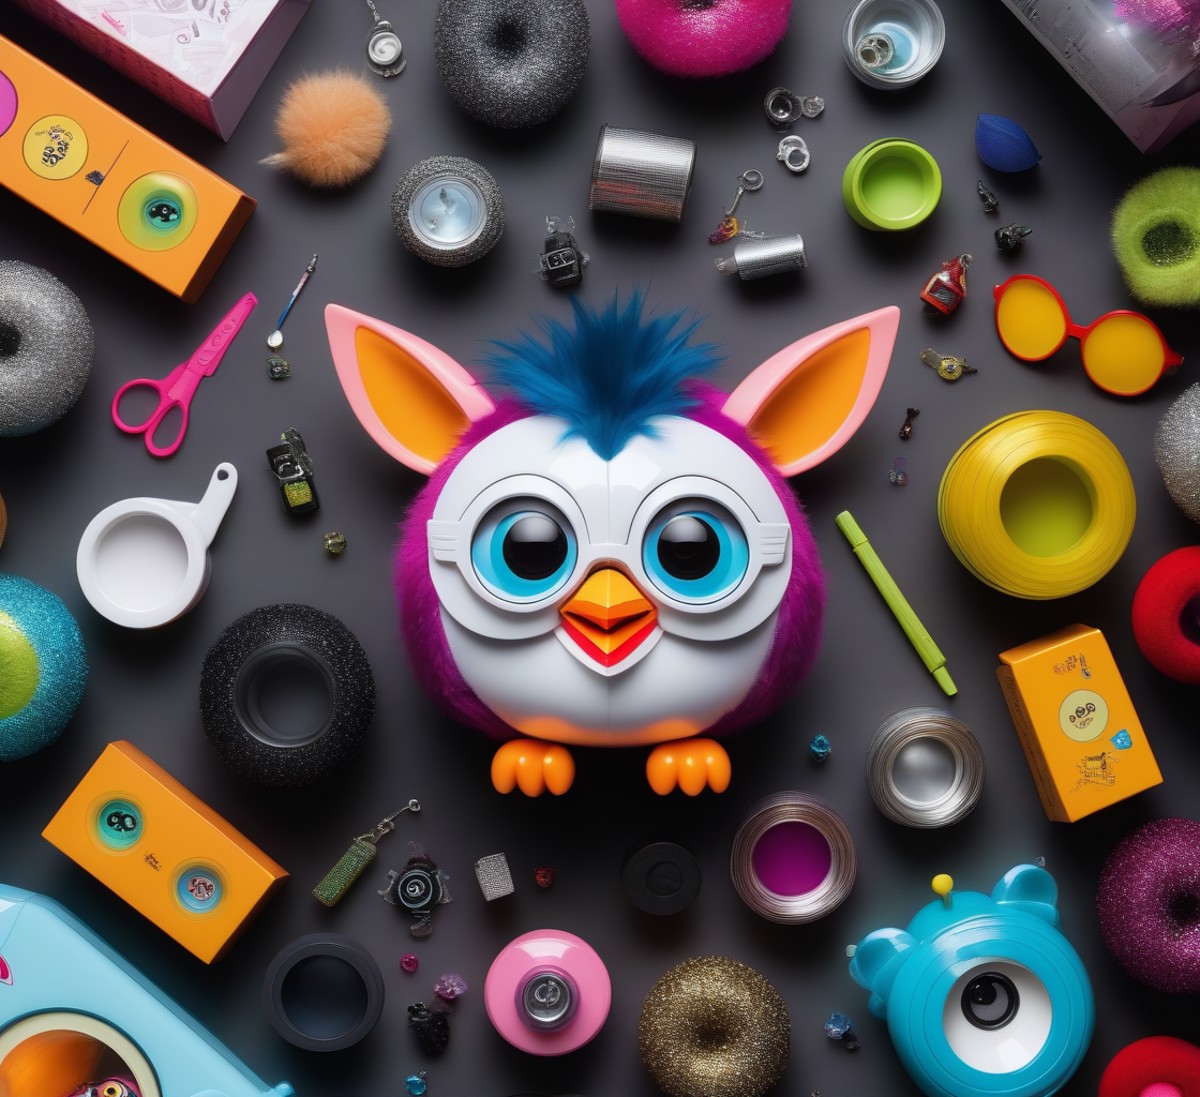 knolling Furby, lots of details and additions, assembled character in the center of the image